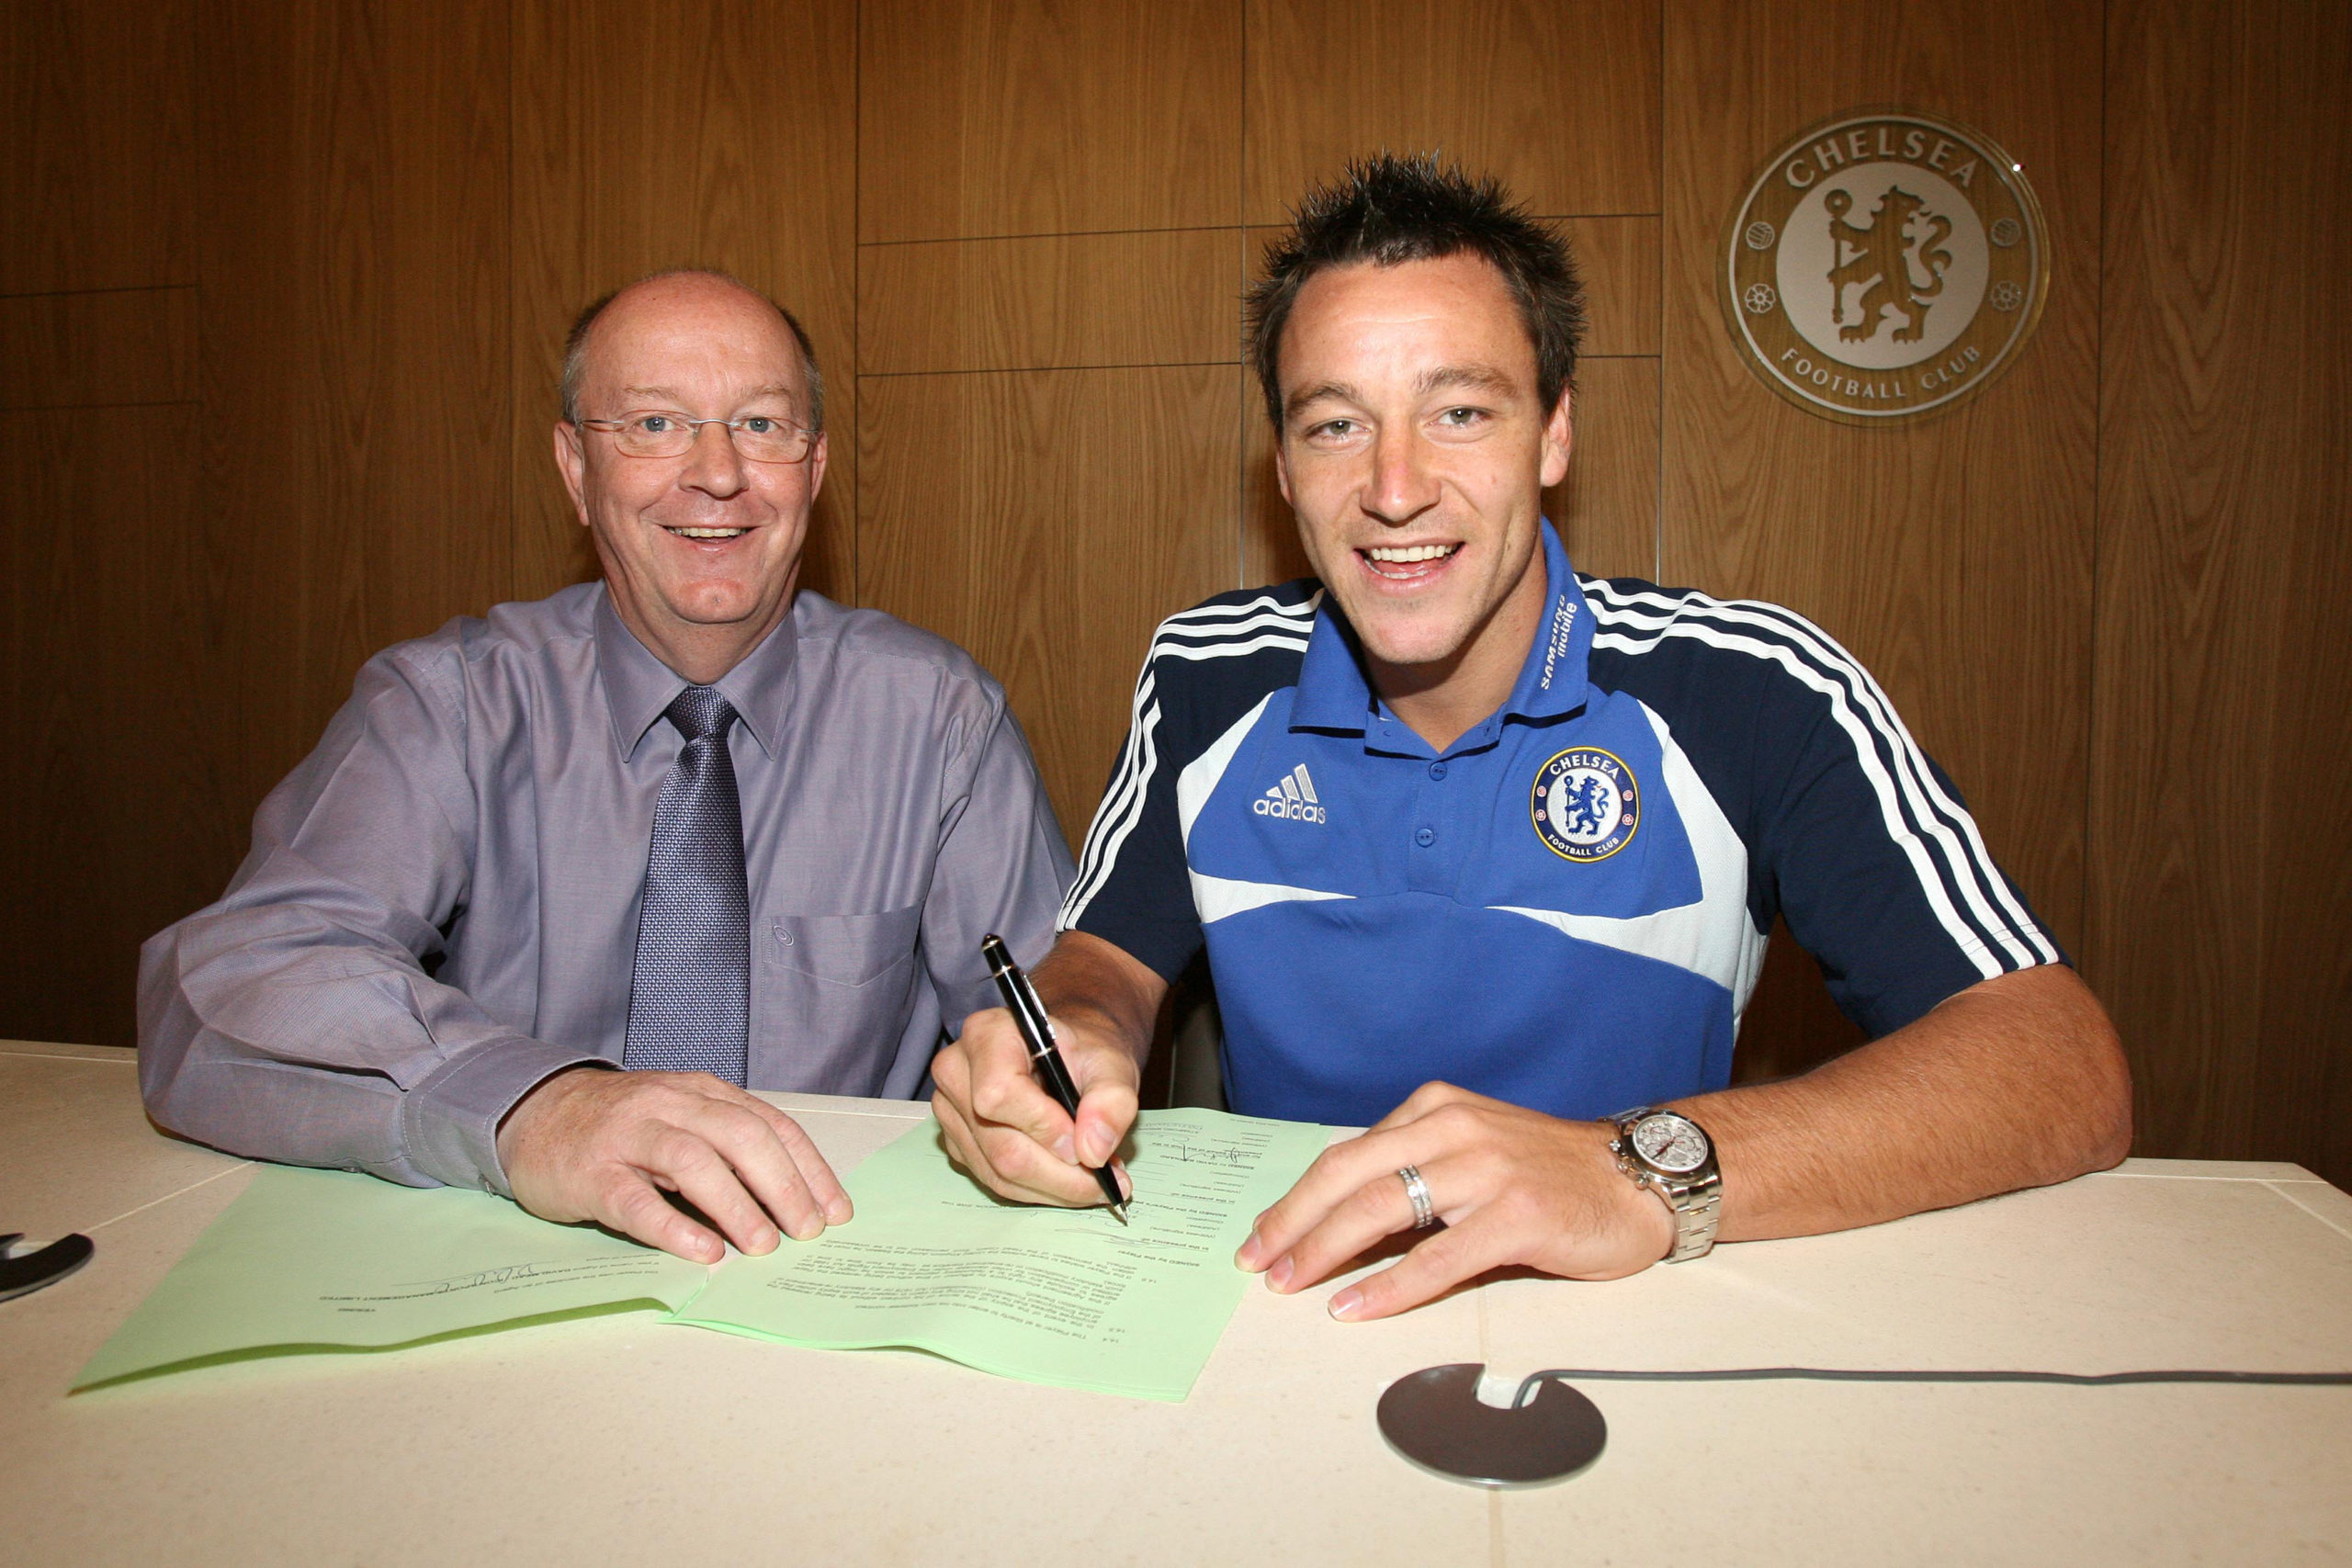 Soccer - Barclays Premier League - John Terry Signs New Contract